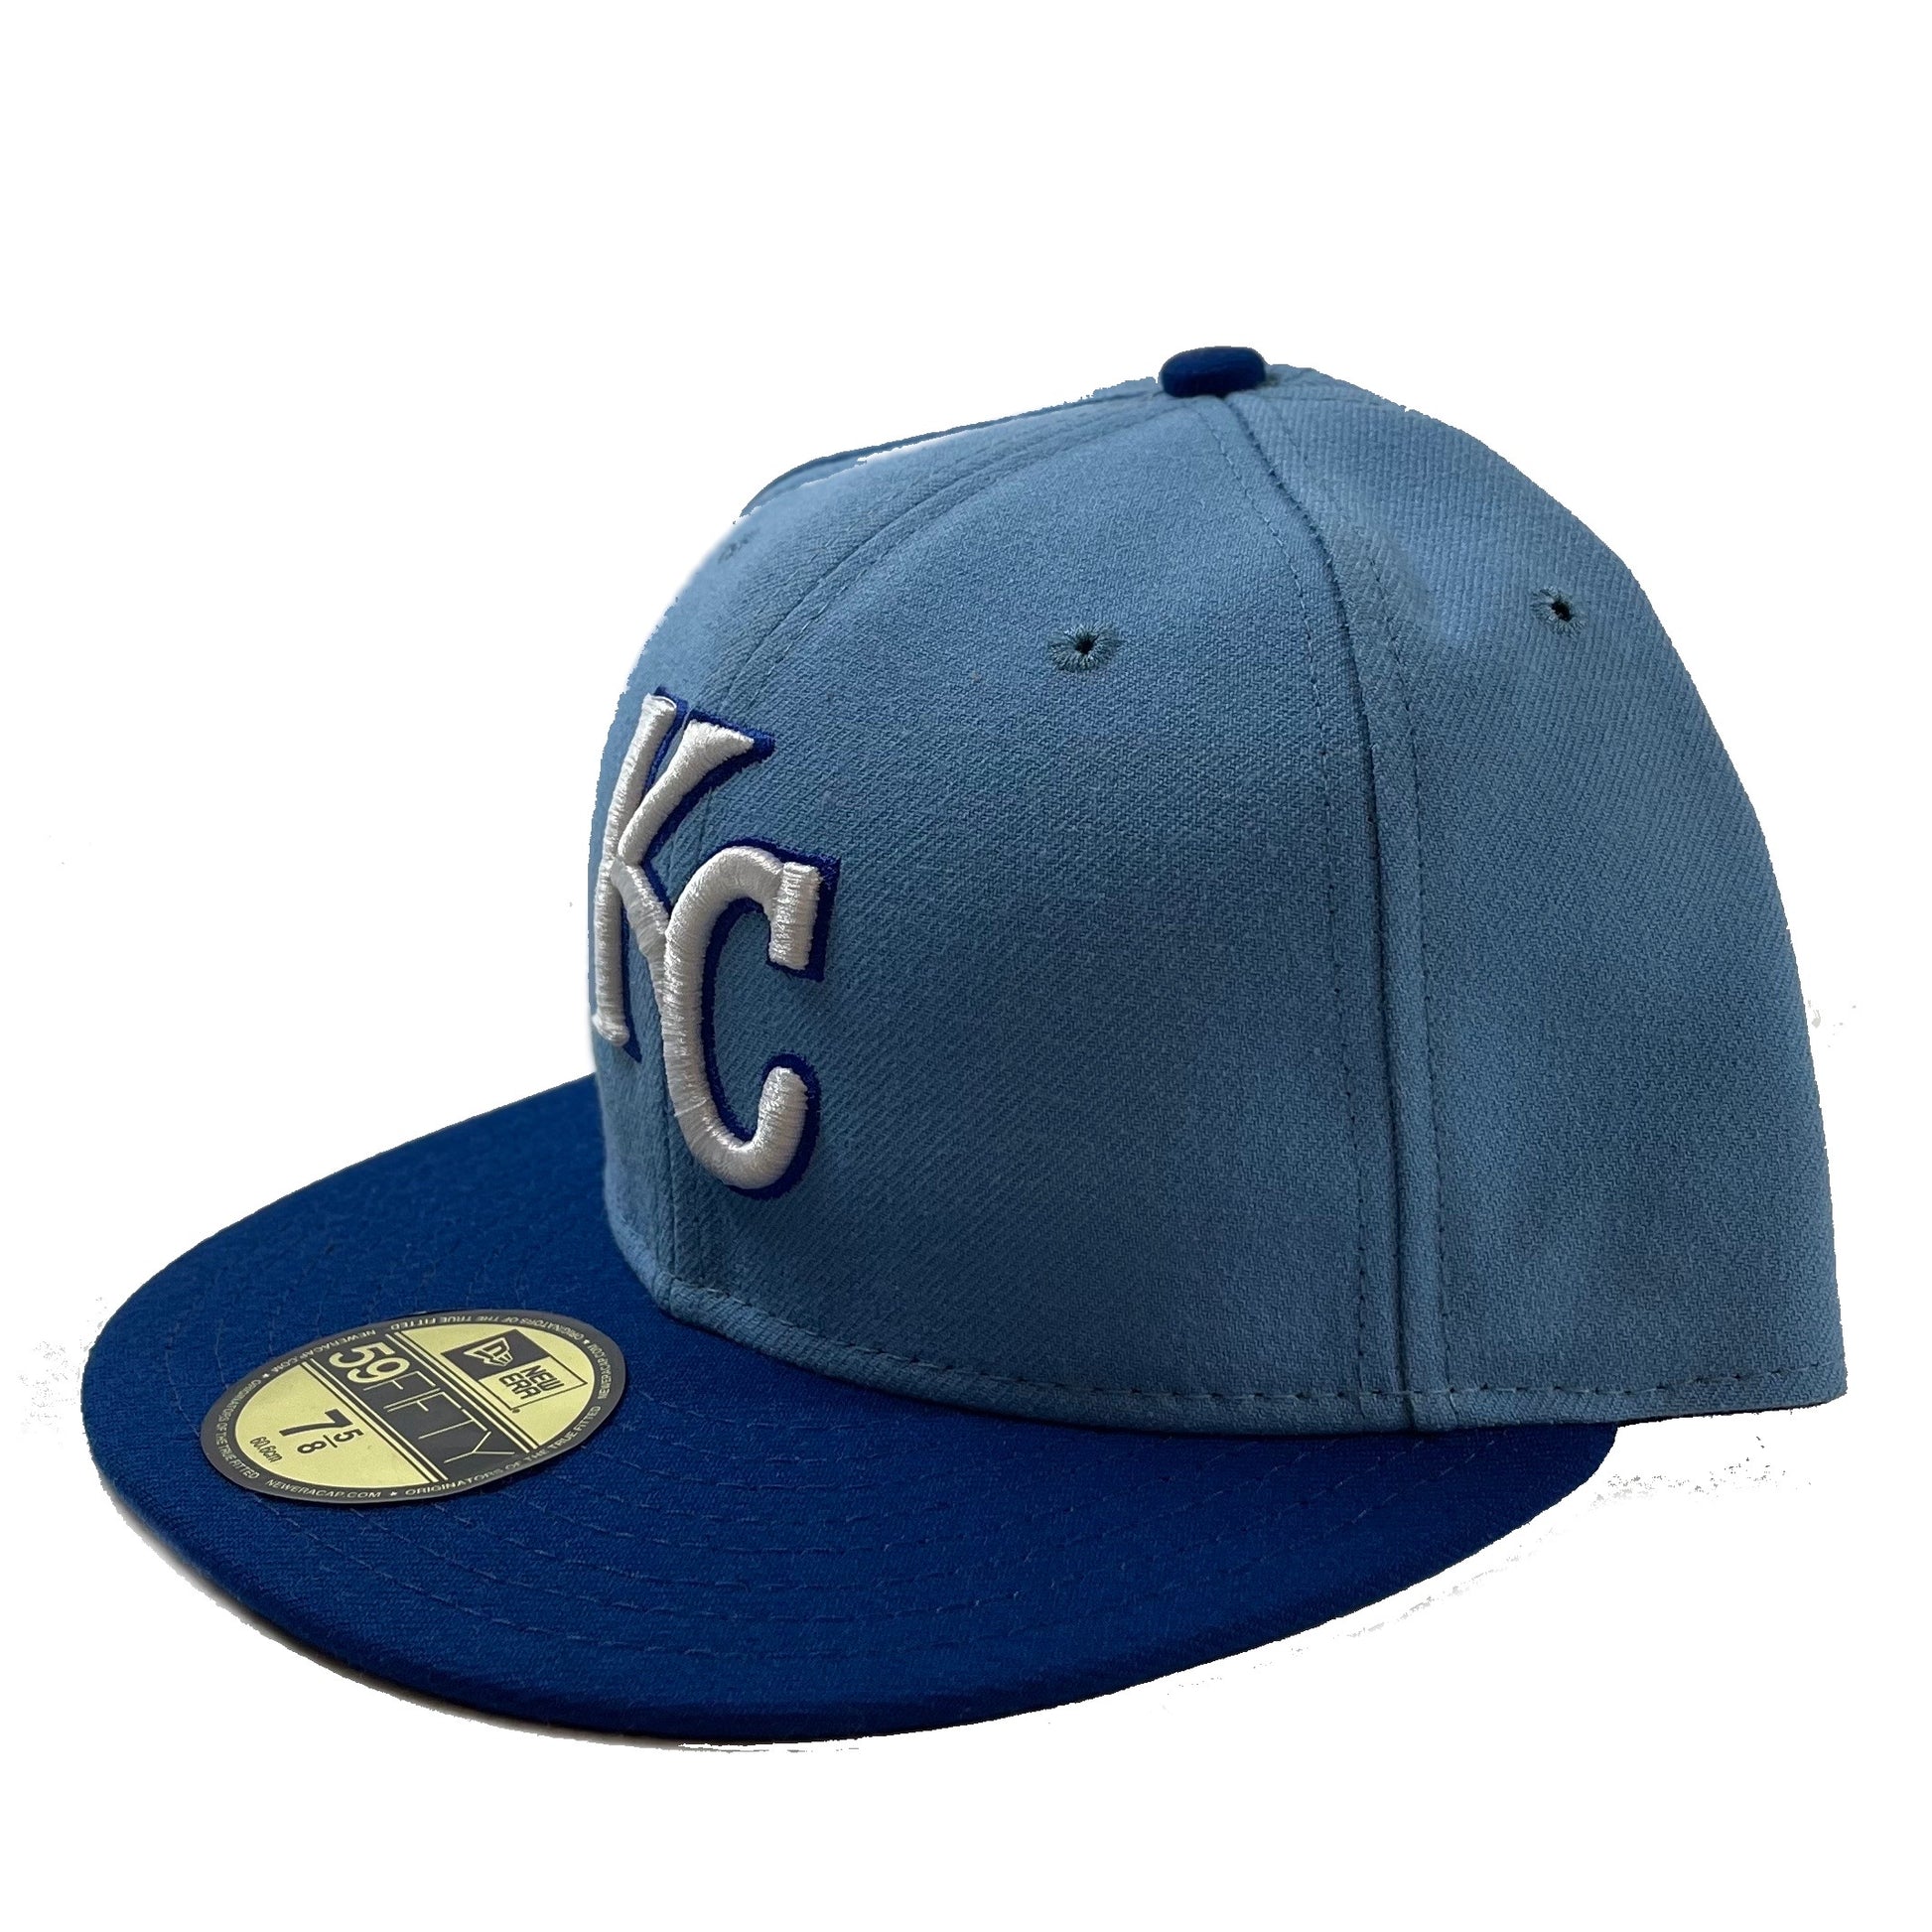 Kansas City Royals (Light Blue) Fitted – Cap World: Embroidery